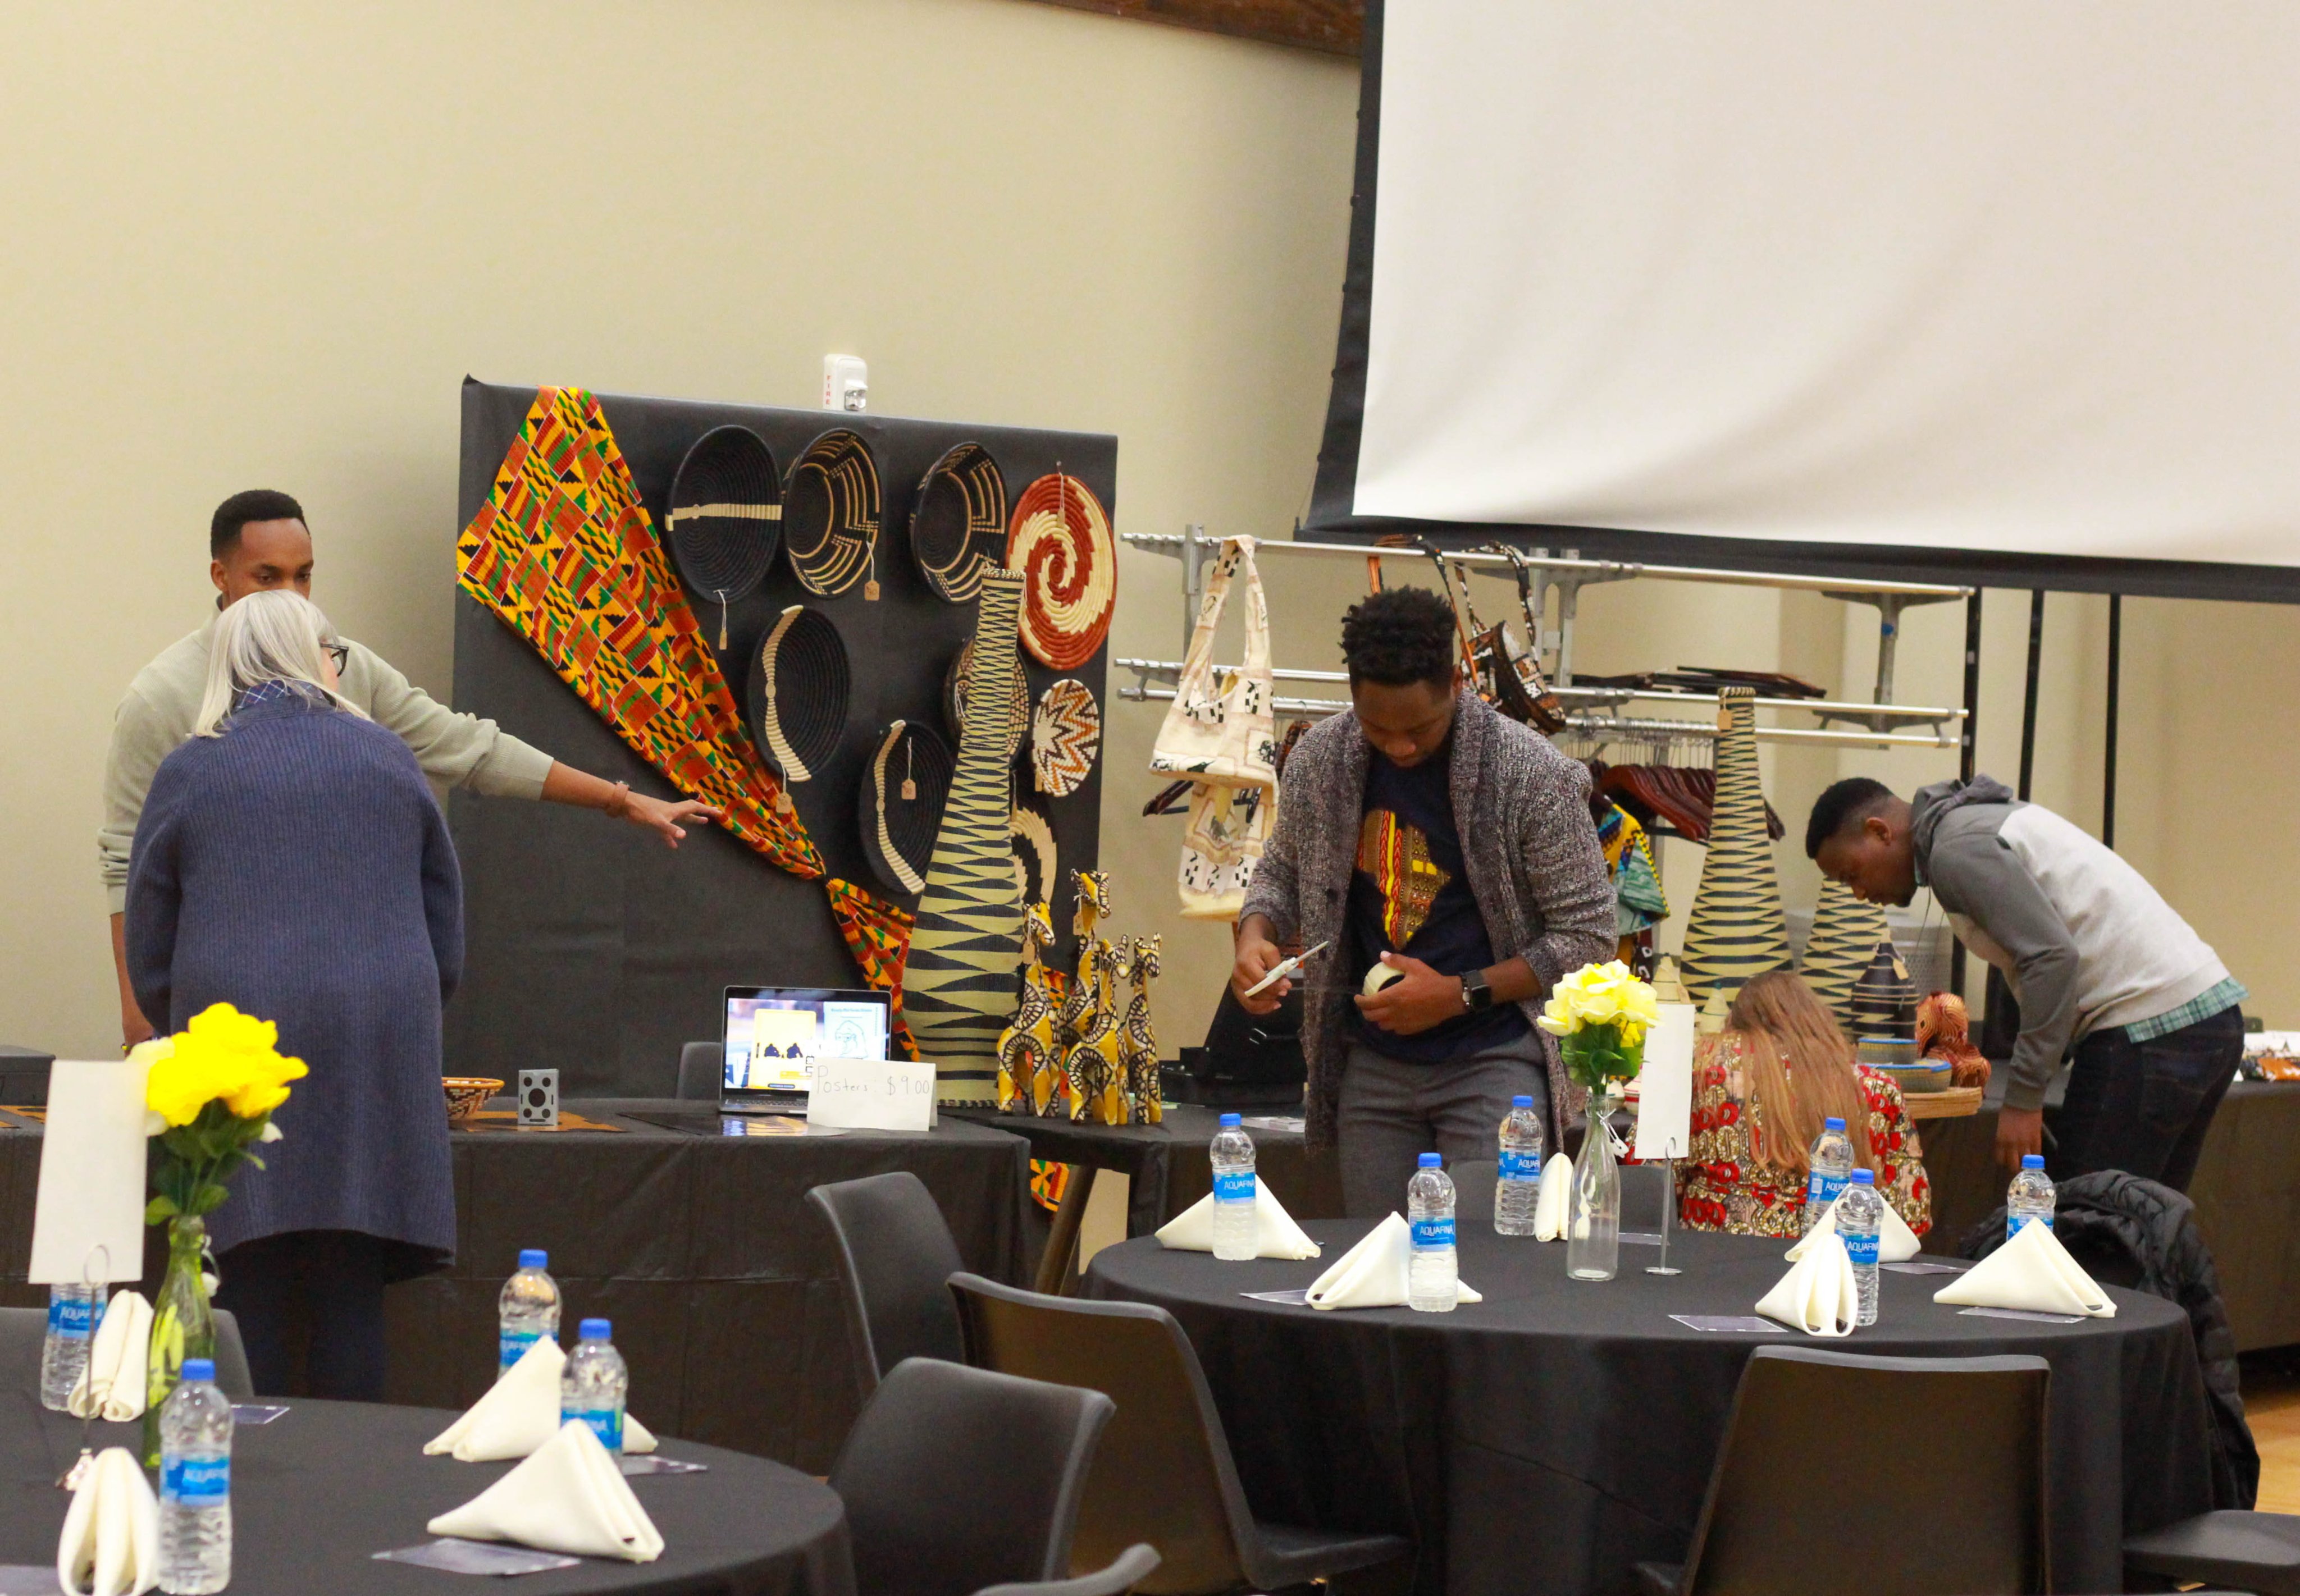 The Rwandan Students Association at the University of Nebraska Lincoln (UNL) in the United States on Saturday February 20 held a cultural gala in which they connected and reflected on the Rwandan culture.